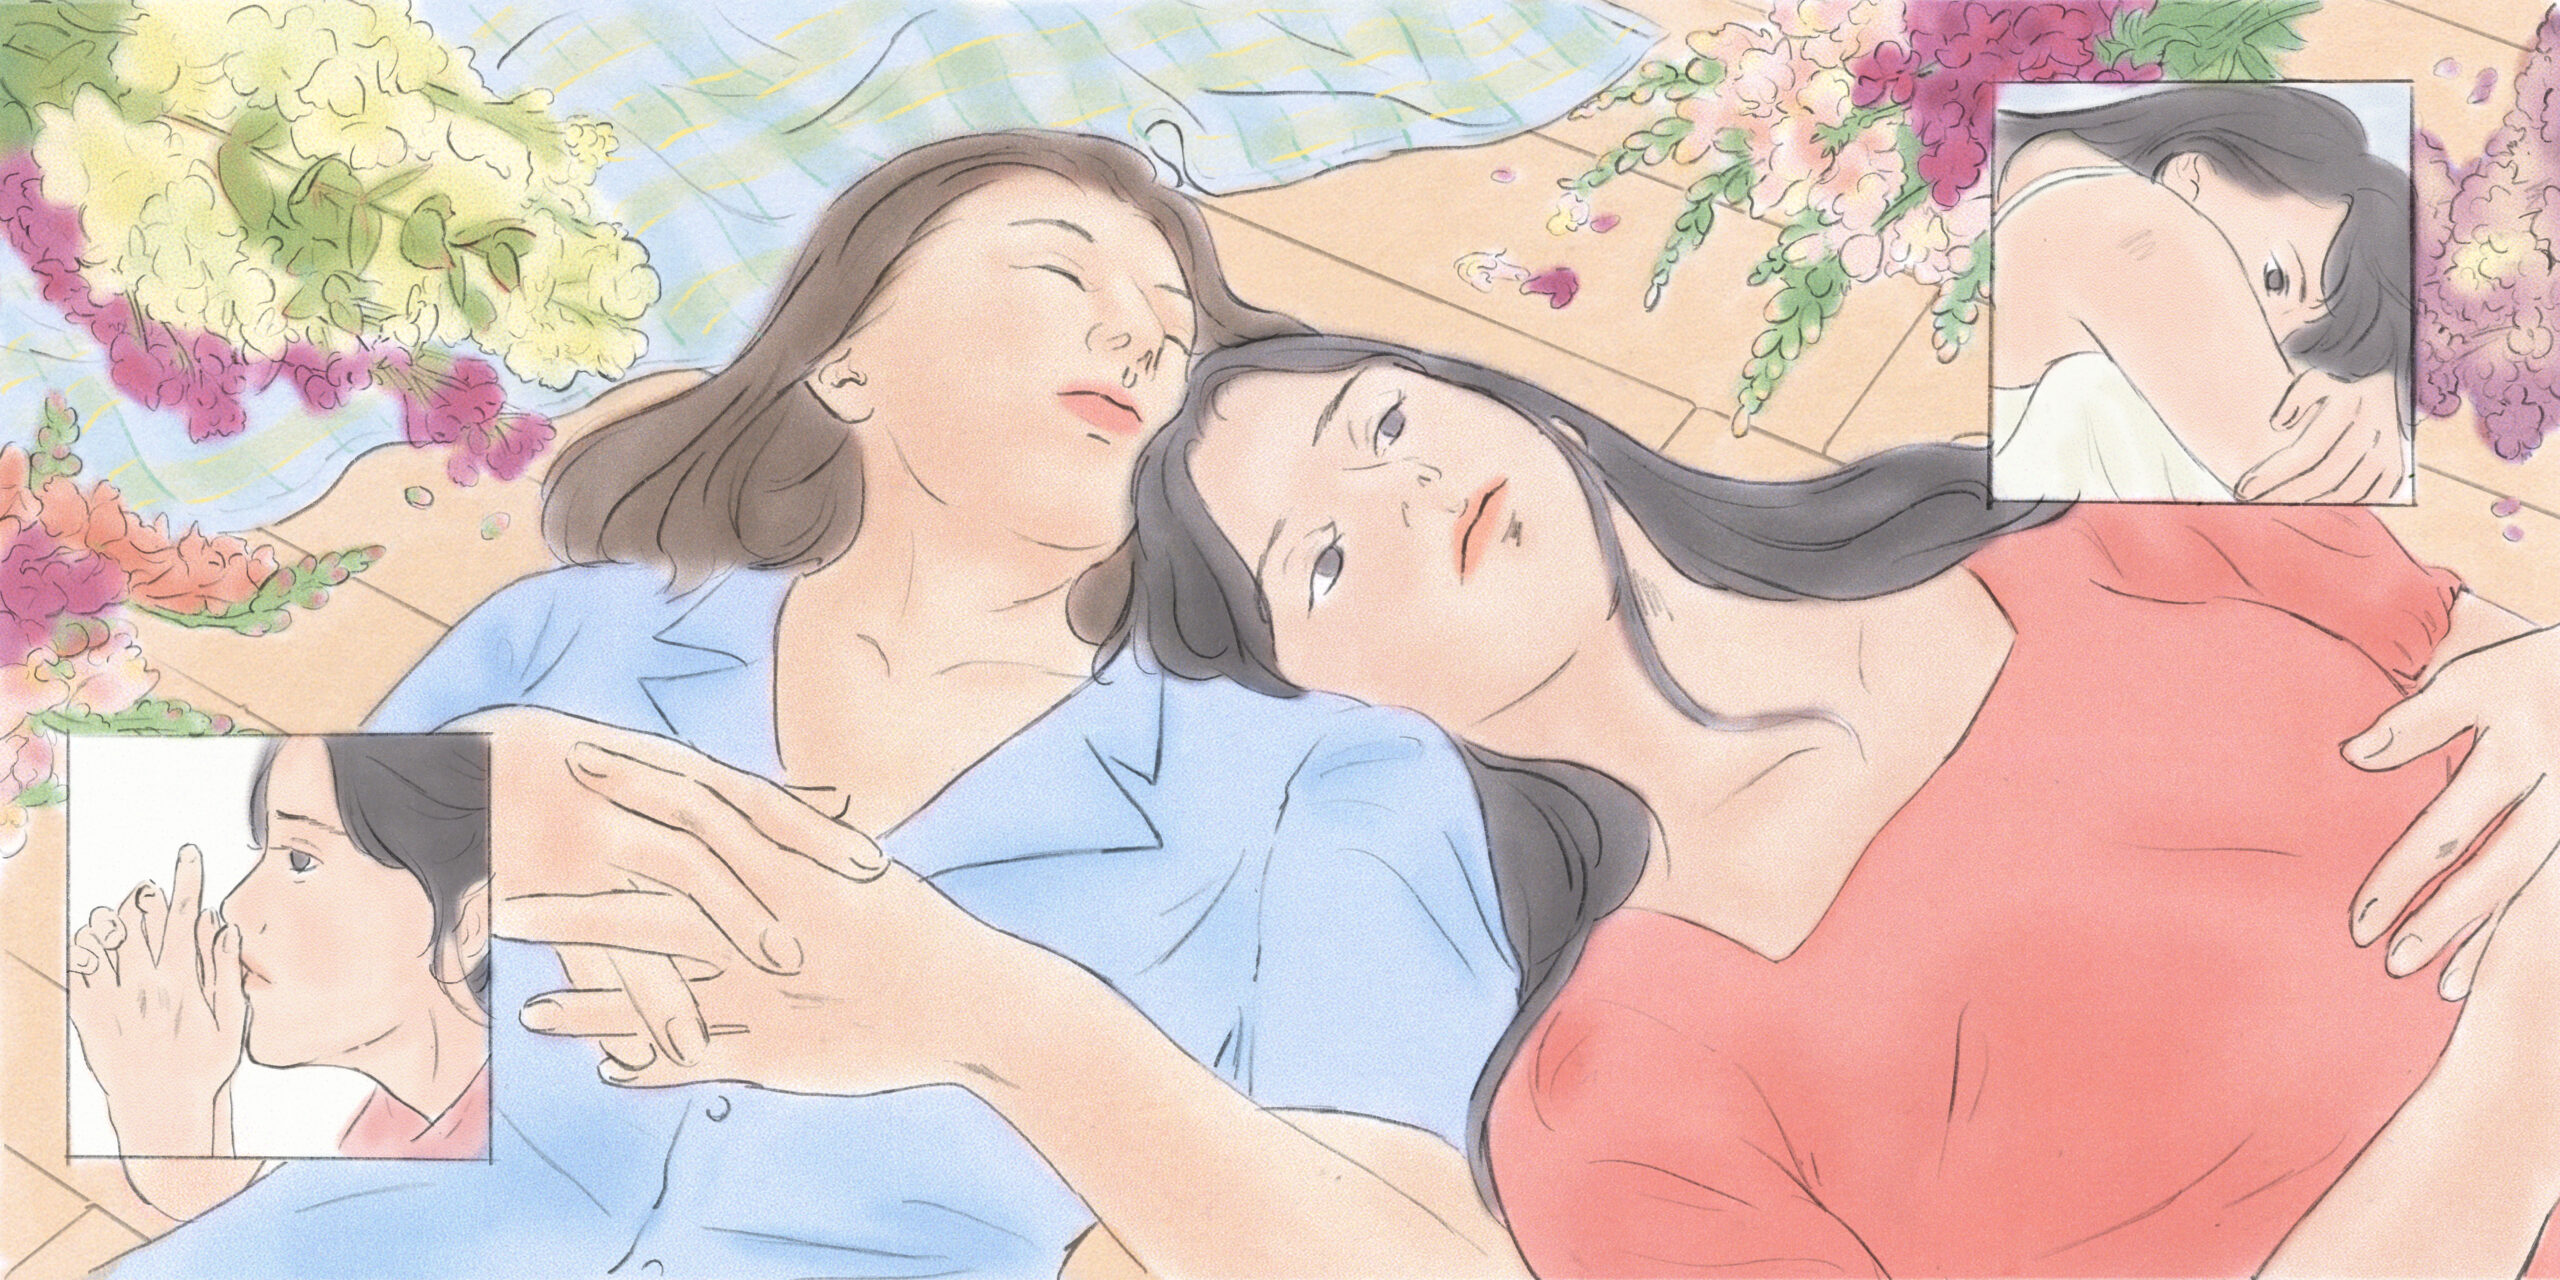 An illustration of two friends lying on the floor, one wearing a light blue, short sleeved collared shirt, her hands clasped over her chest and her eyes closed; the other woman is wearing a pink blouse and is leaning on her shoulder, looking up at the sky. Behind them there is a checkered blanket and bouquets of flowers. In two inserts, we see the woman in the pink shirt alone, clearly in pain and grieving.